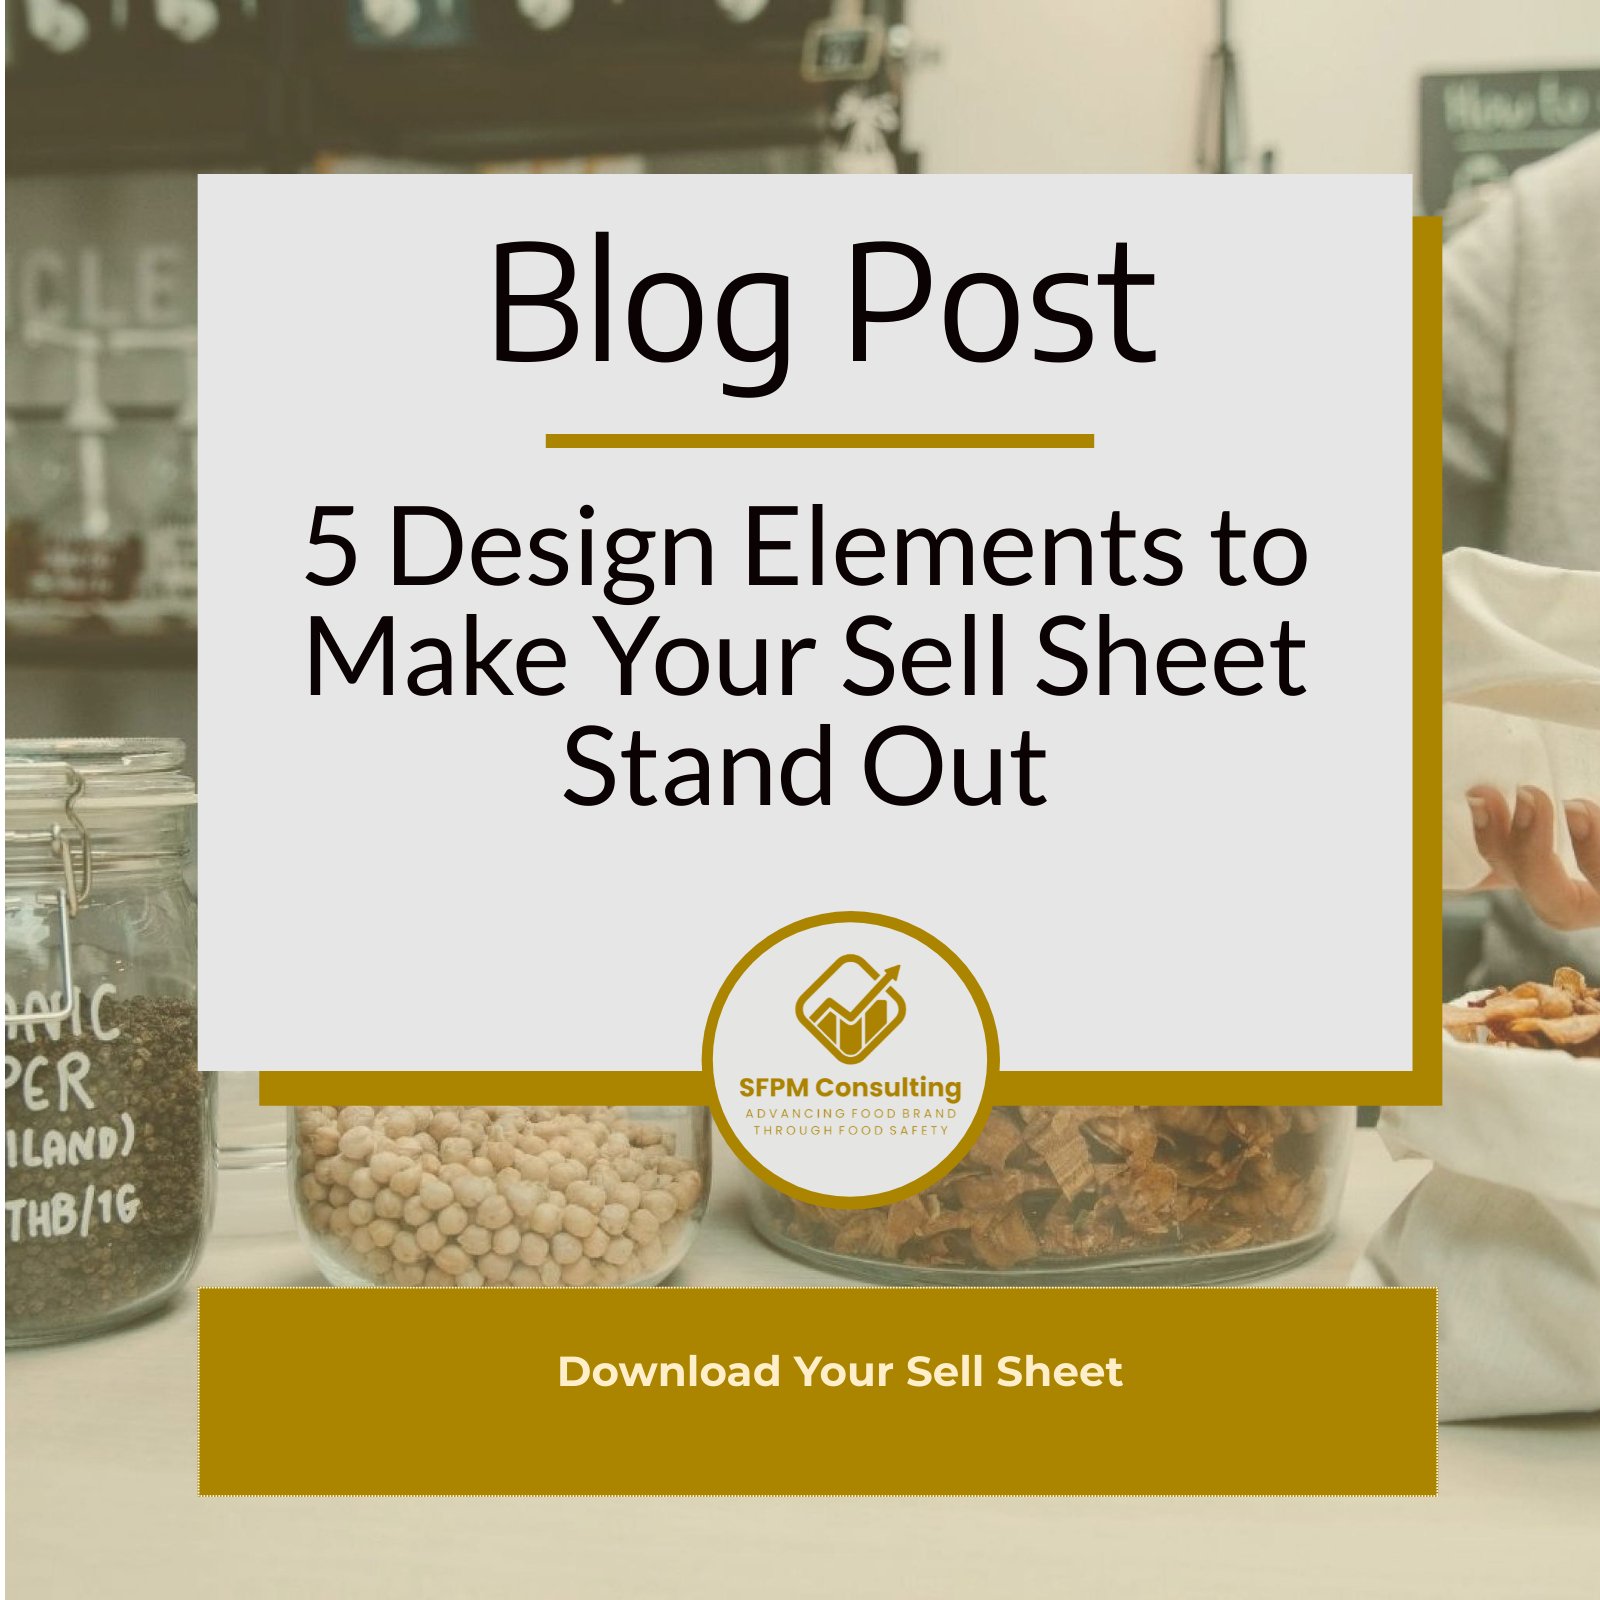 SFPM Consulting present 5 Design Elements to Make Your Sell Sheet Stand Out blog